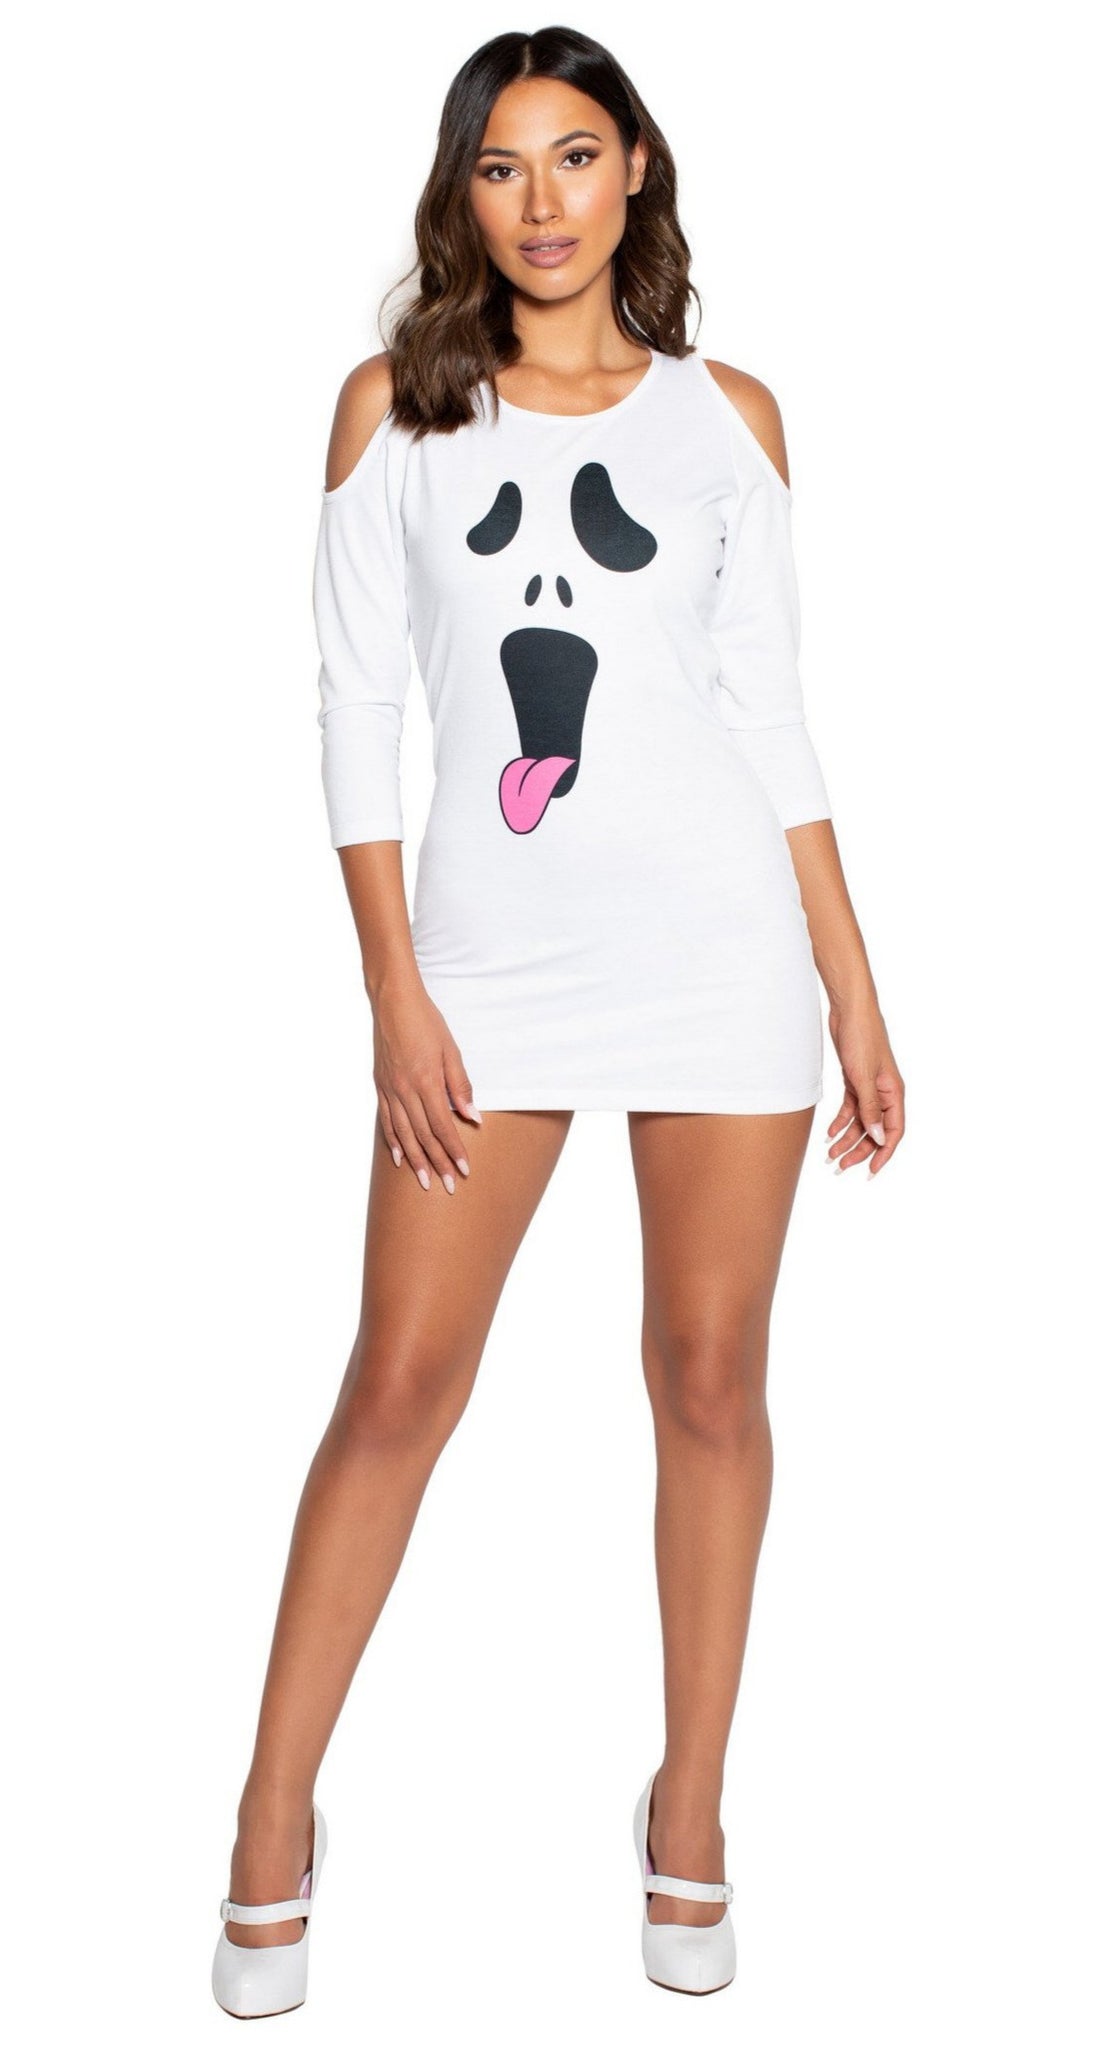 Silly Ghost Dress Costume